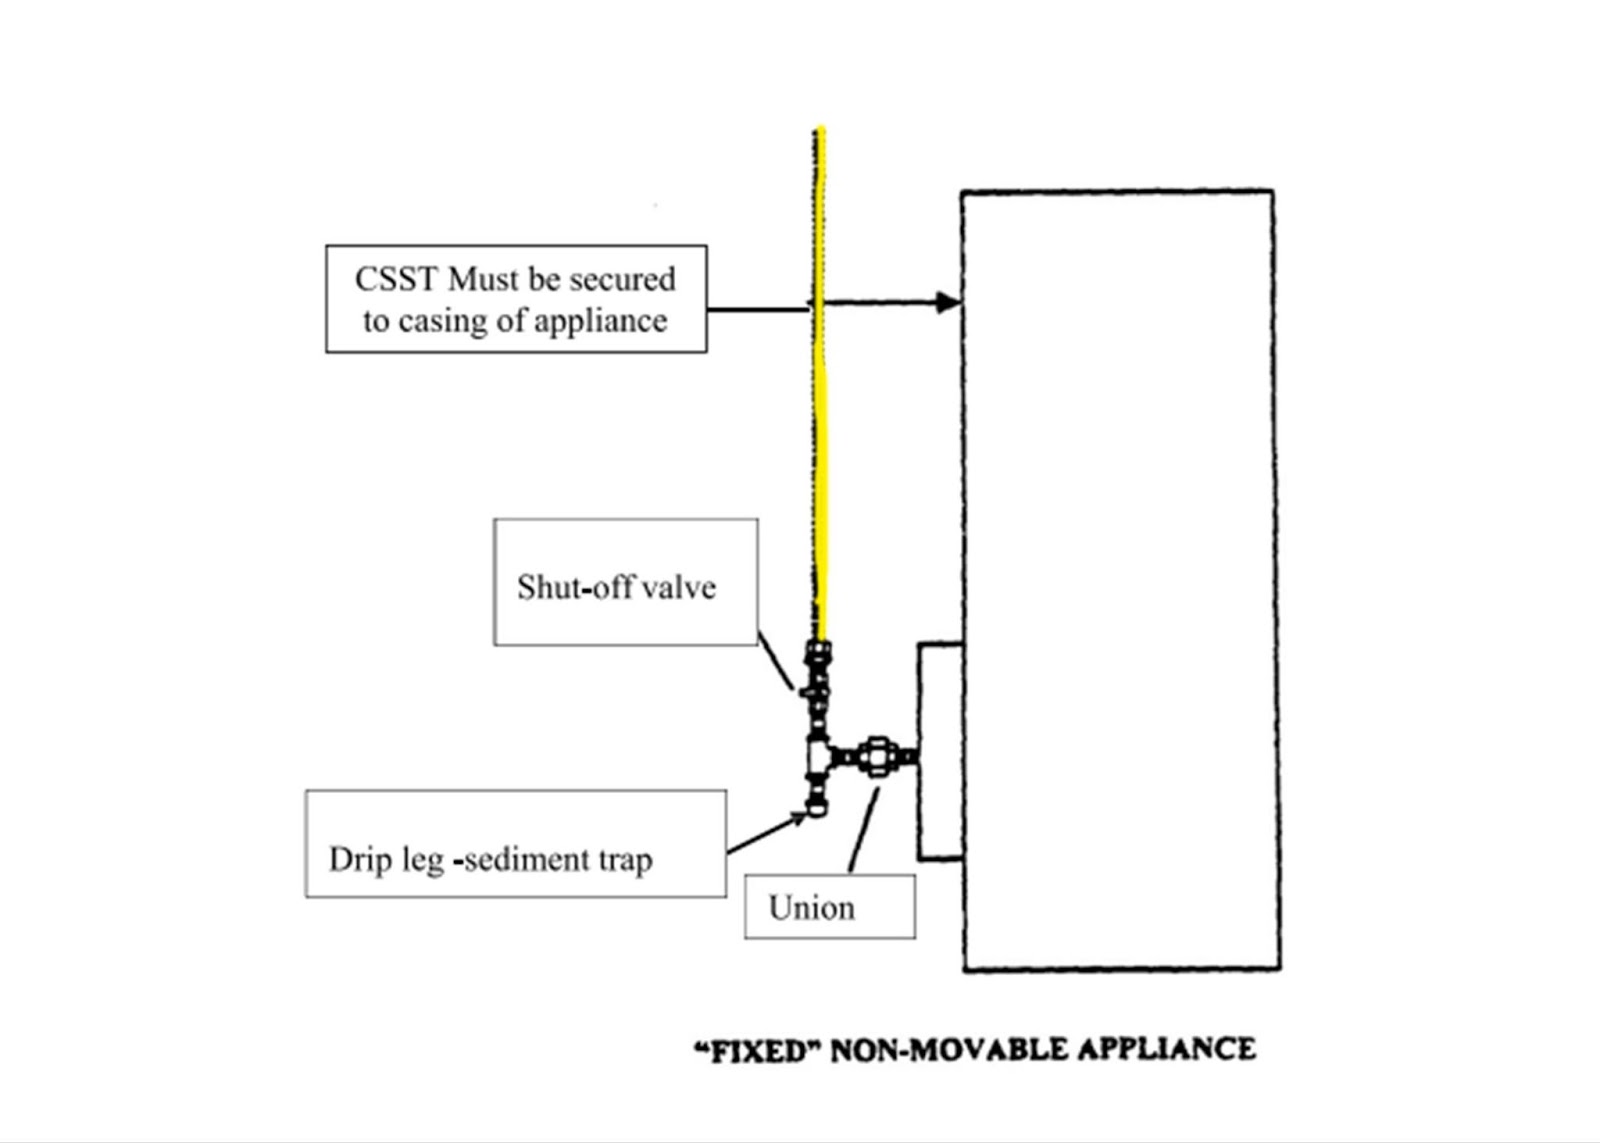 How to Run a CSST Flexible Gas Line from Meter to Appliances